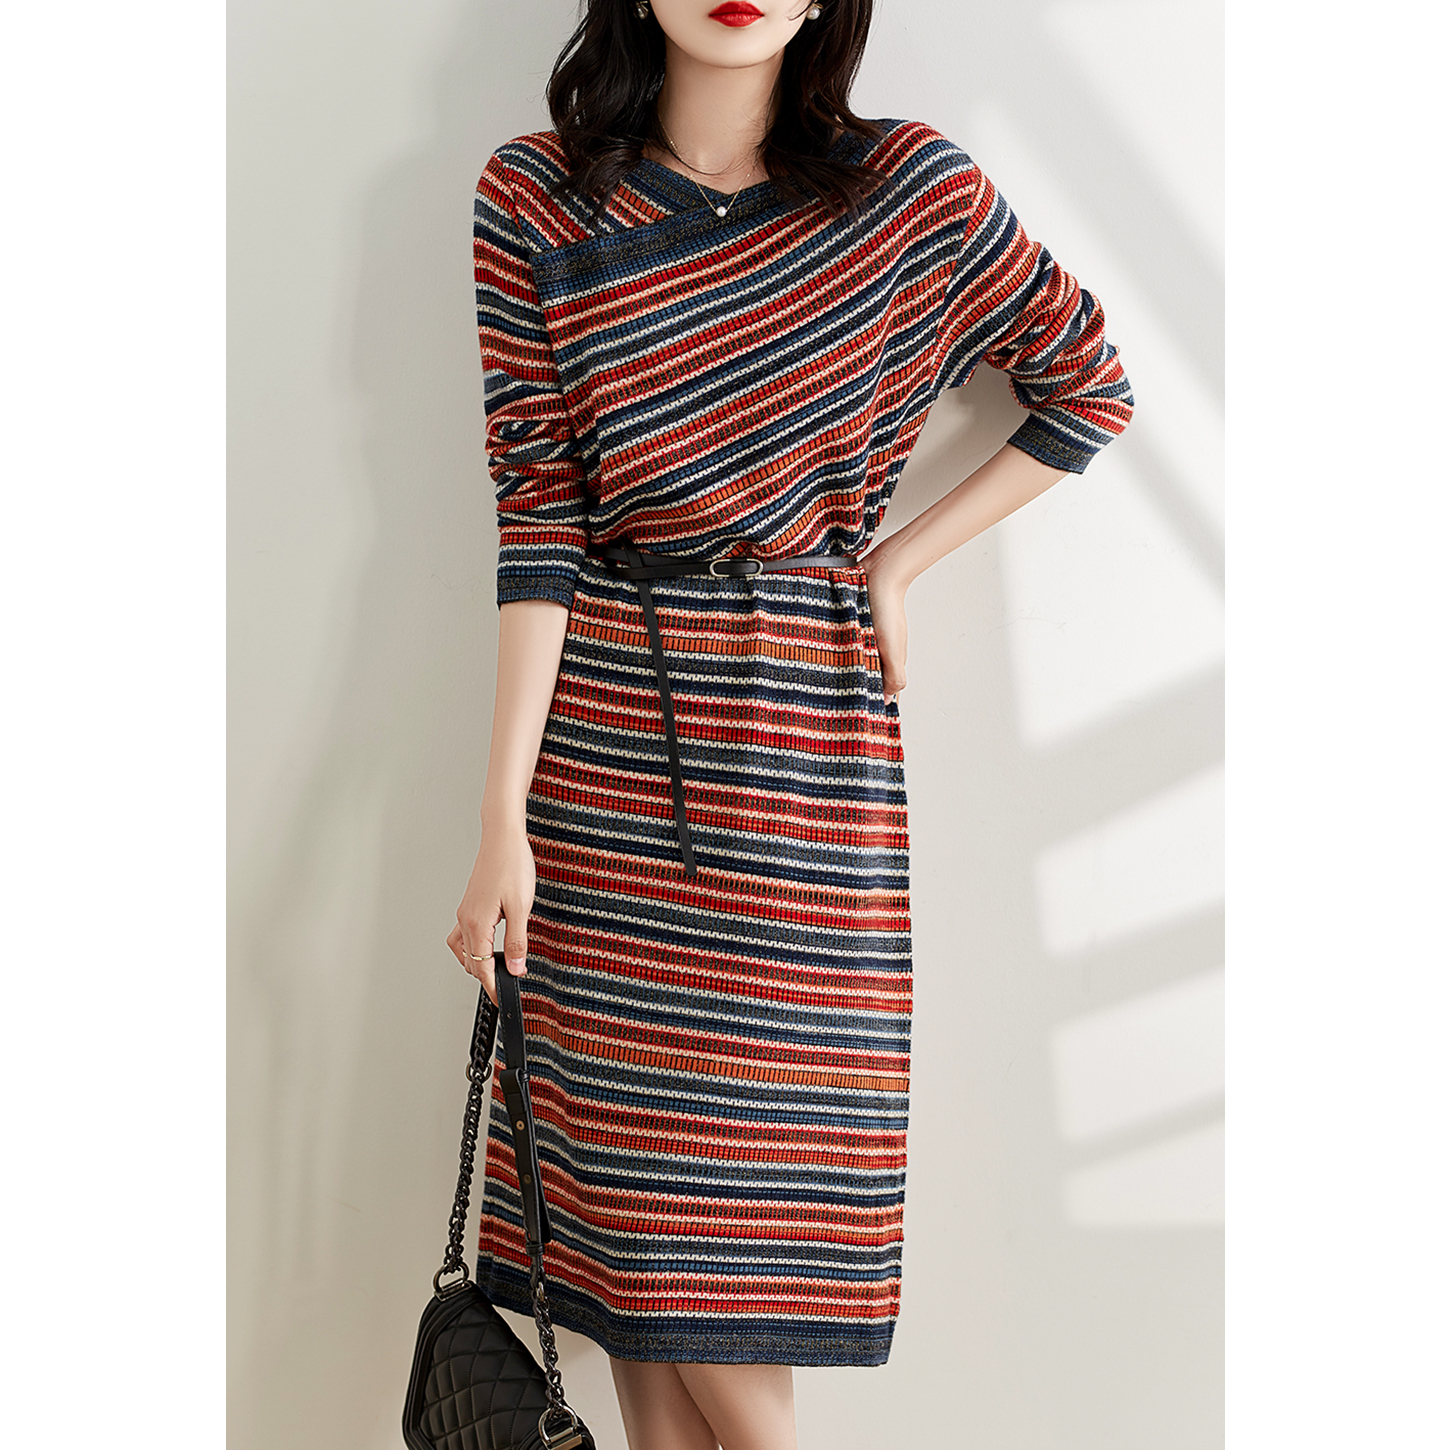 Boo Pala light and luxurious small scents striped 2021 Fall new bright silk knit V collar dress women's clothing